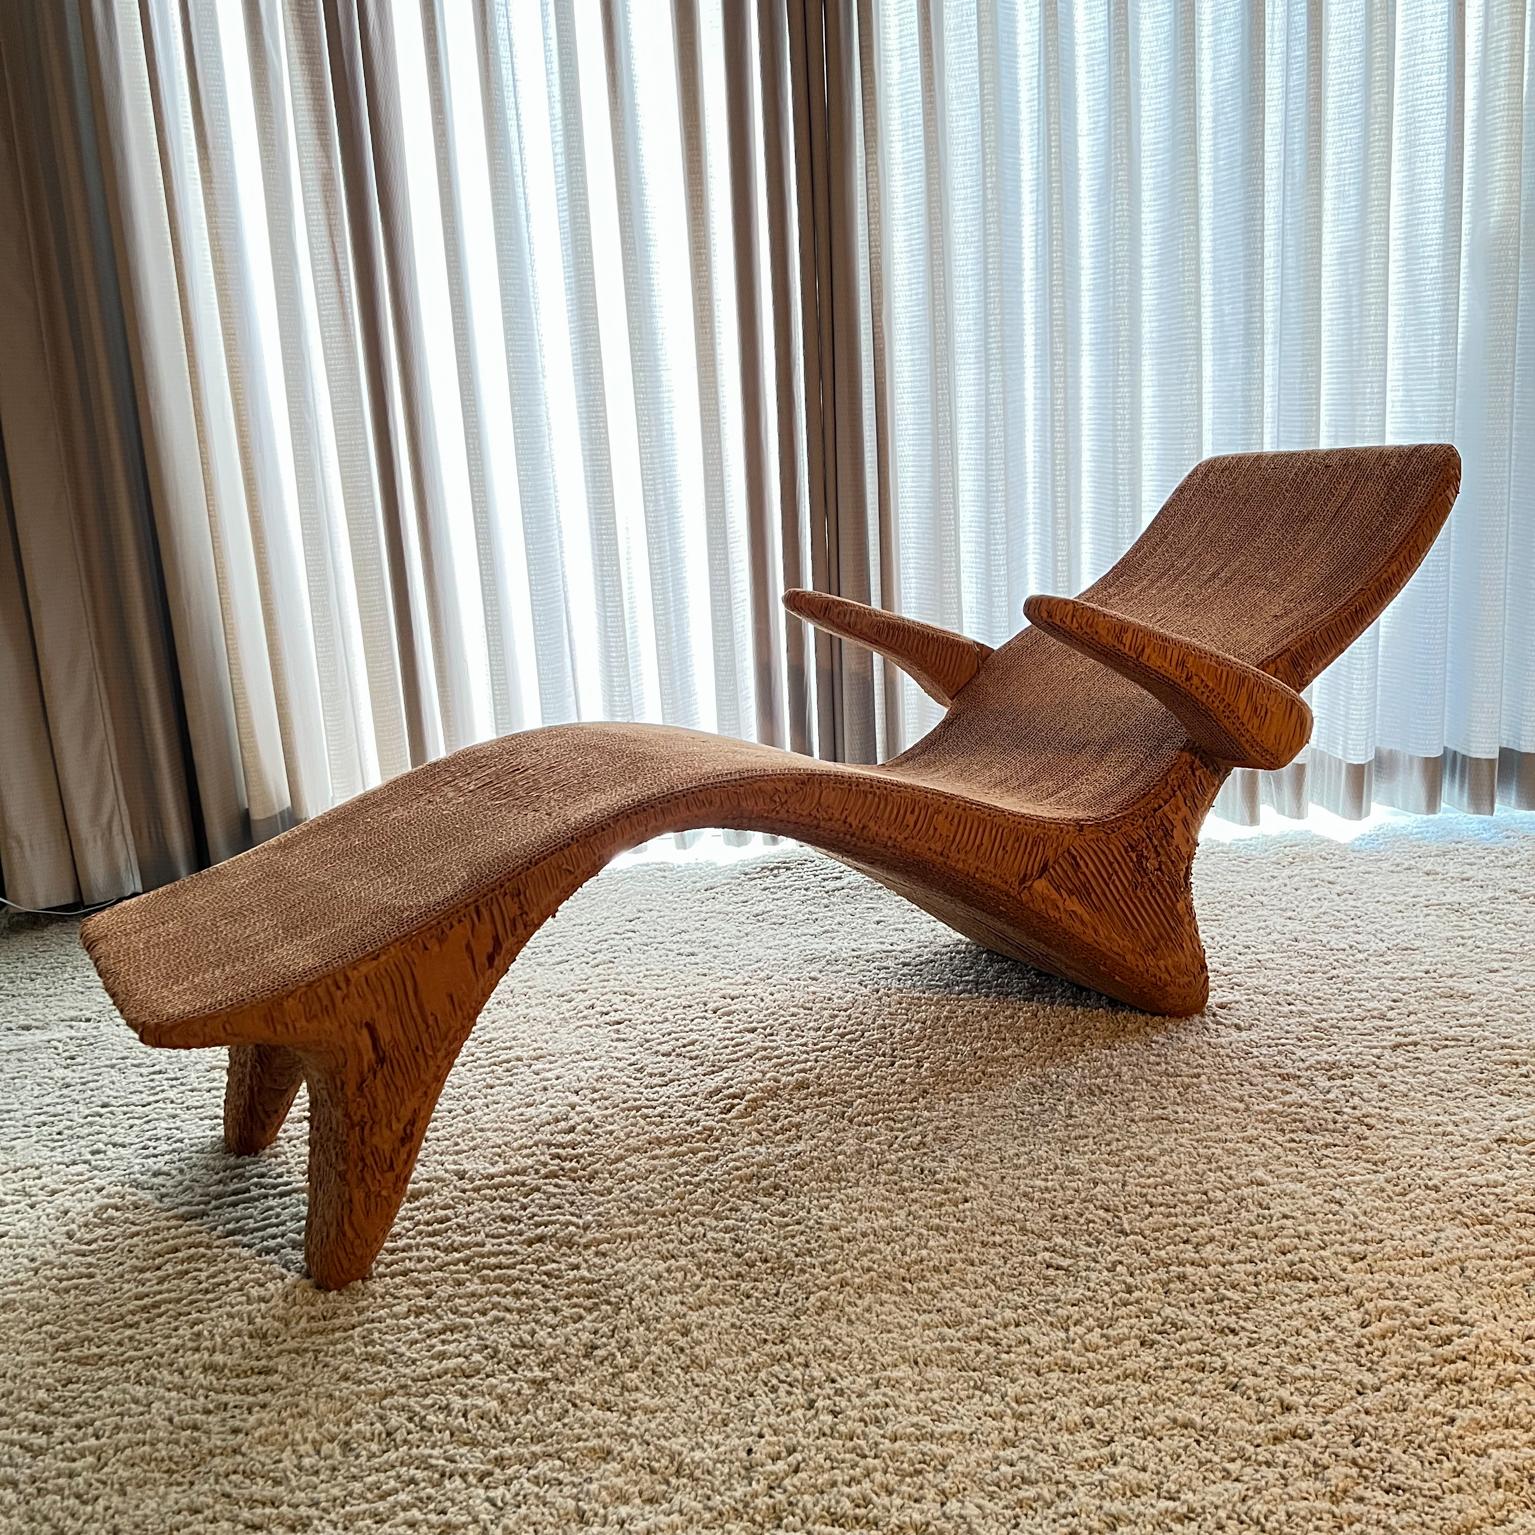 Wood  1970s Chaise Lounge LA Art Chair Style of Frank Gehry  For Sale